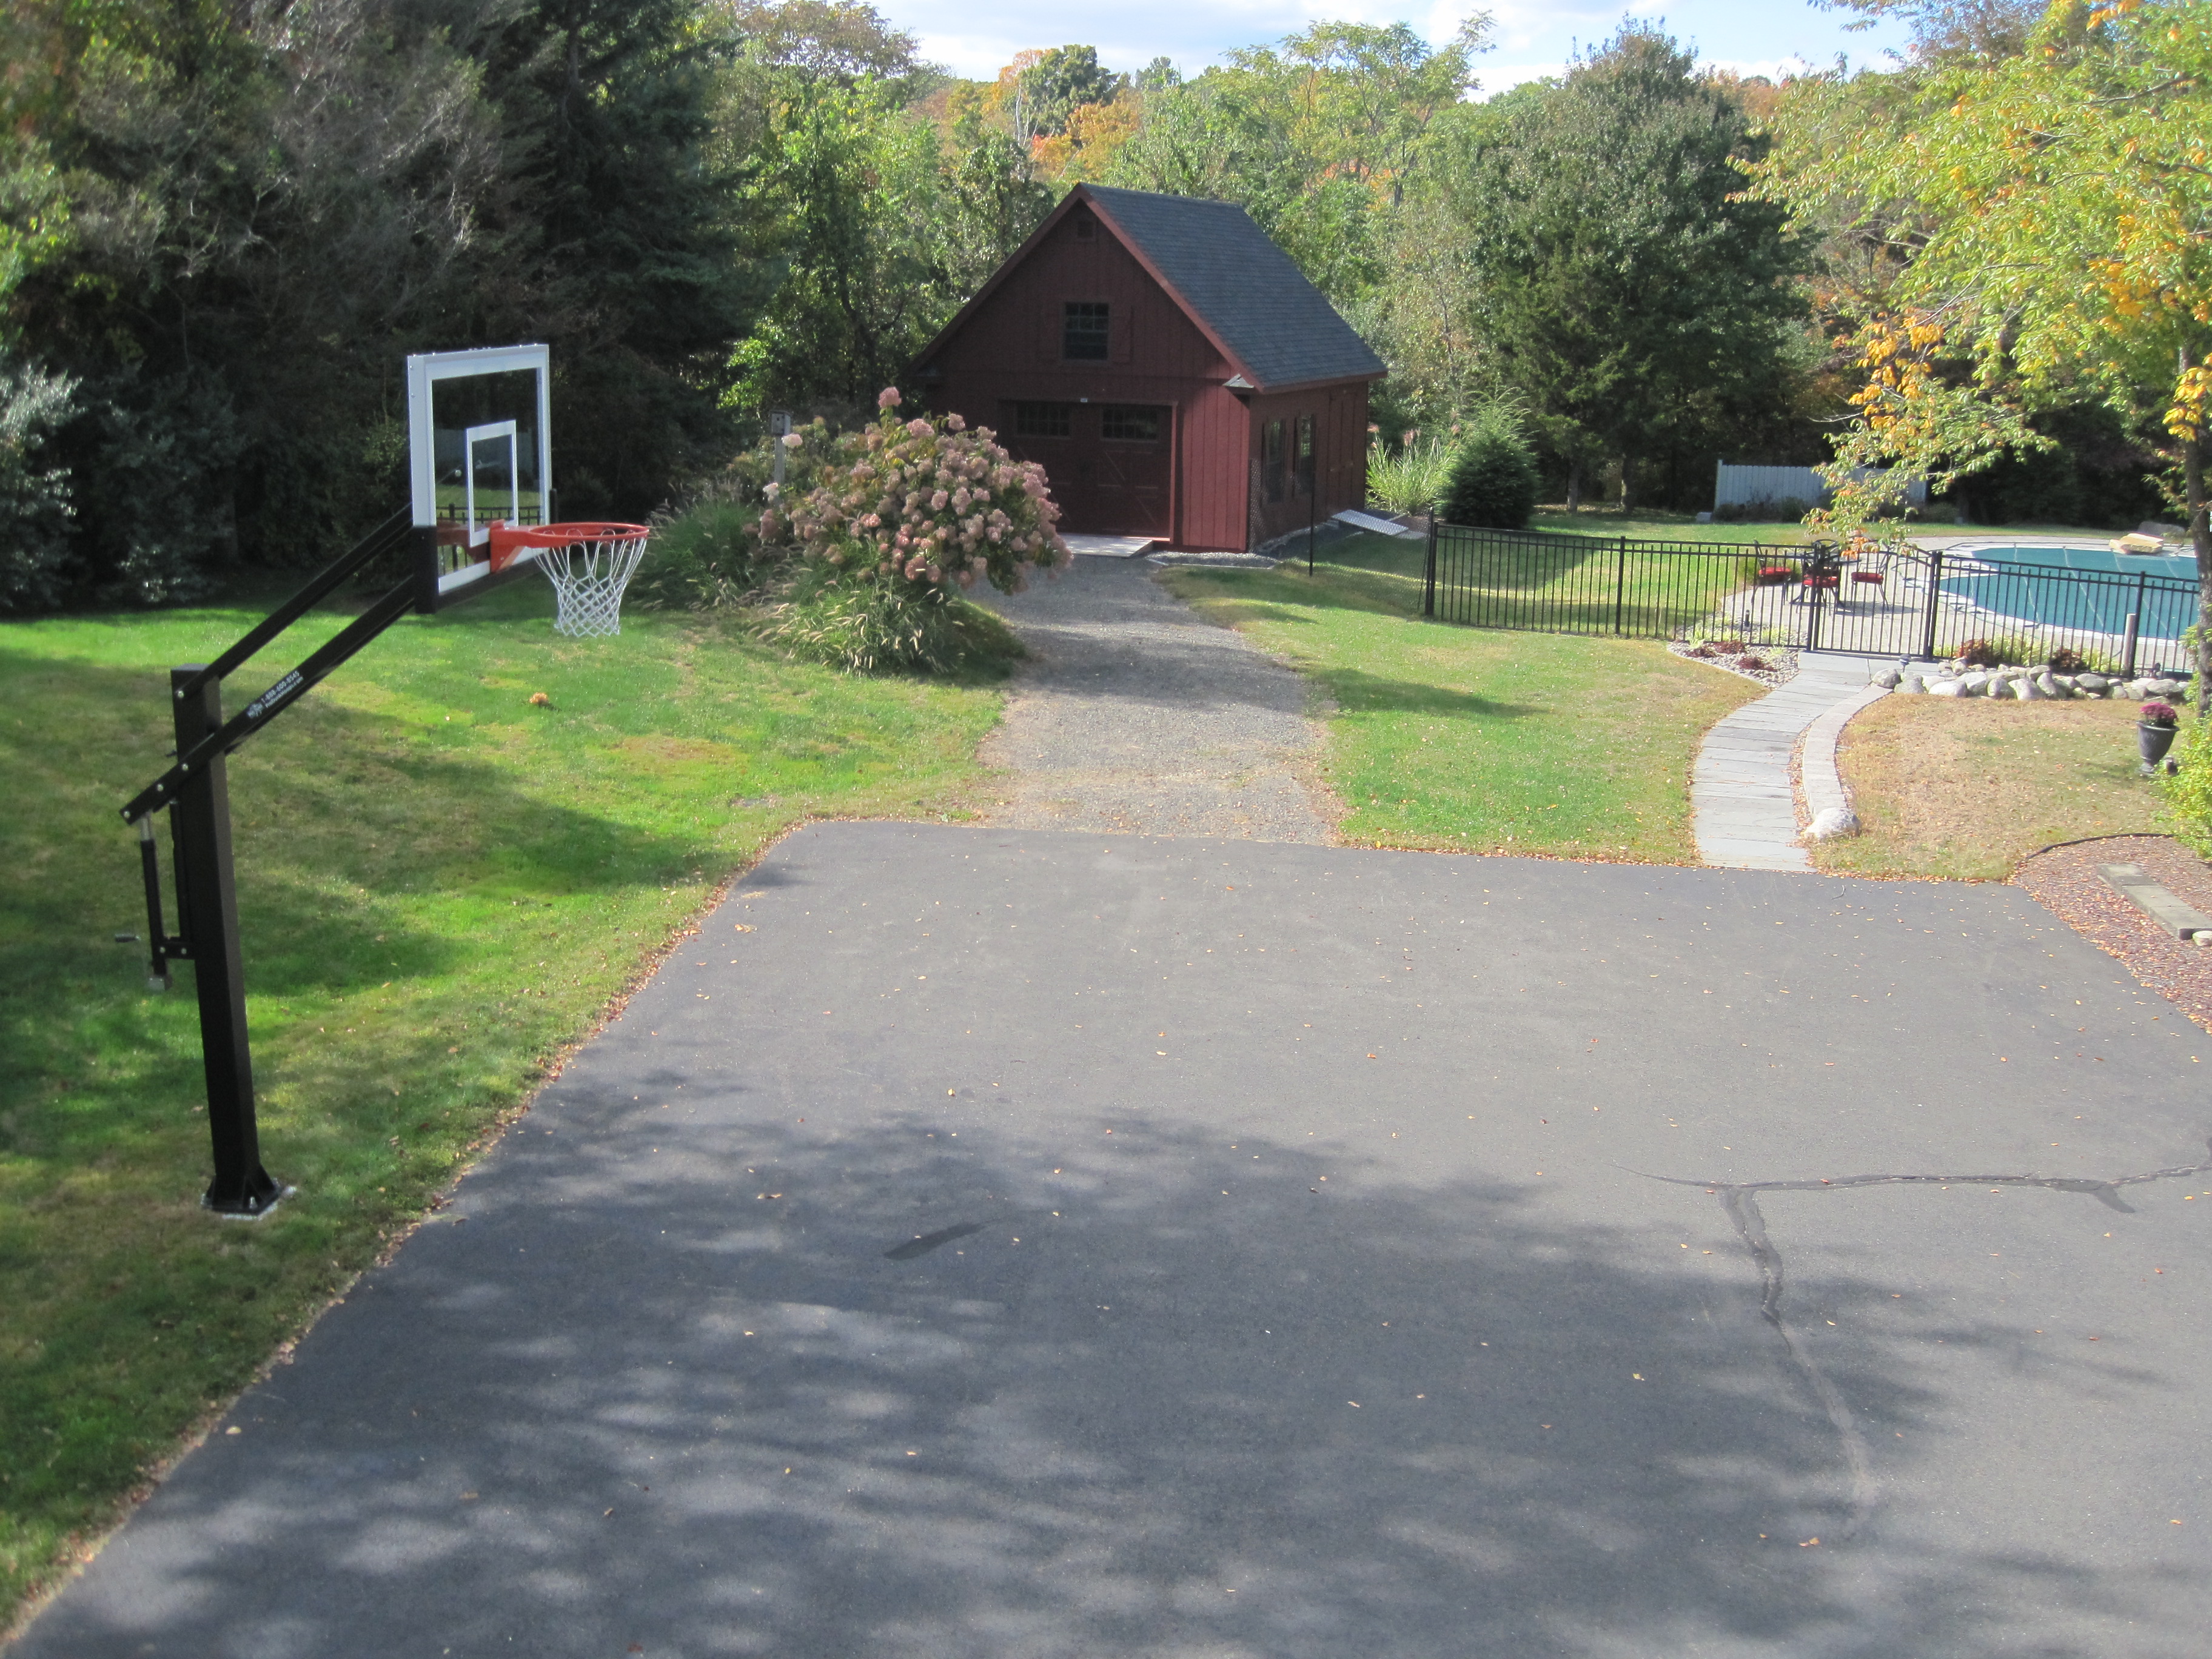 This loft view shows the Pro Dunk Gold Basketball system installed next to this Connecticut home's driveway.